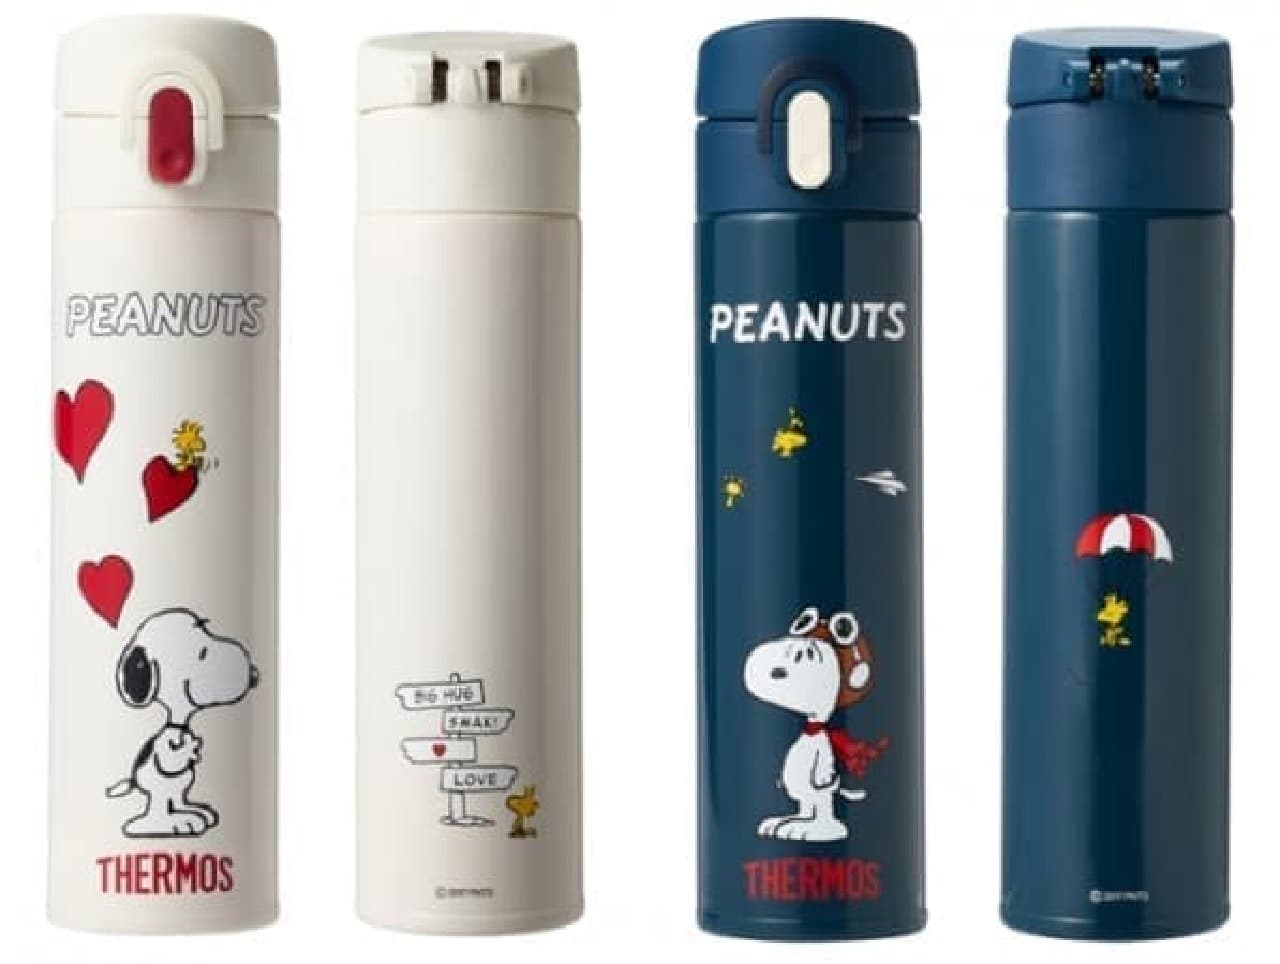 Thermos x PEANUTS, PLAZA limited bottle